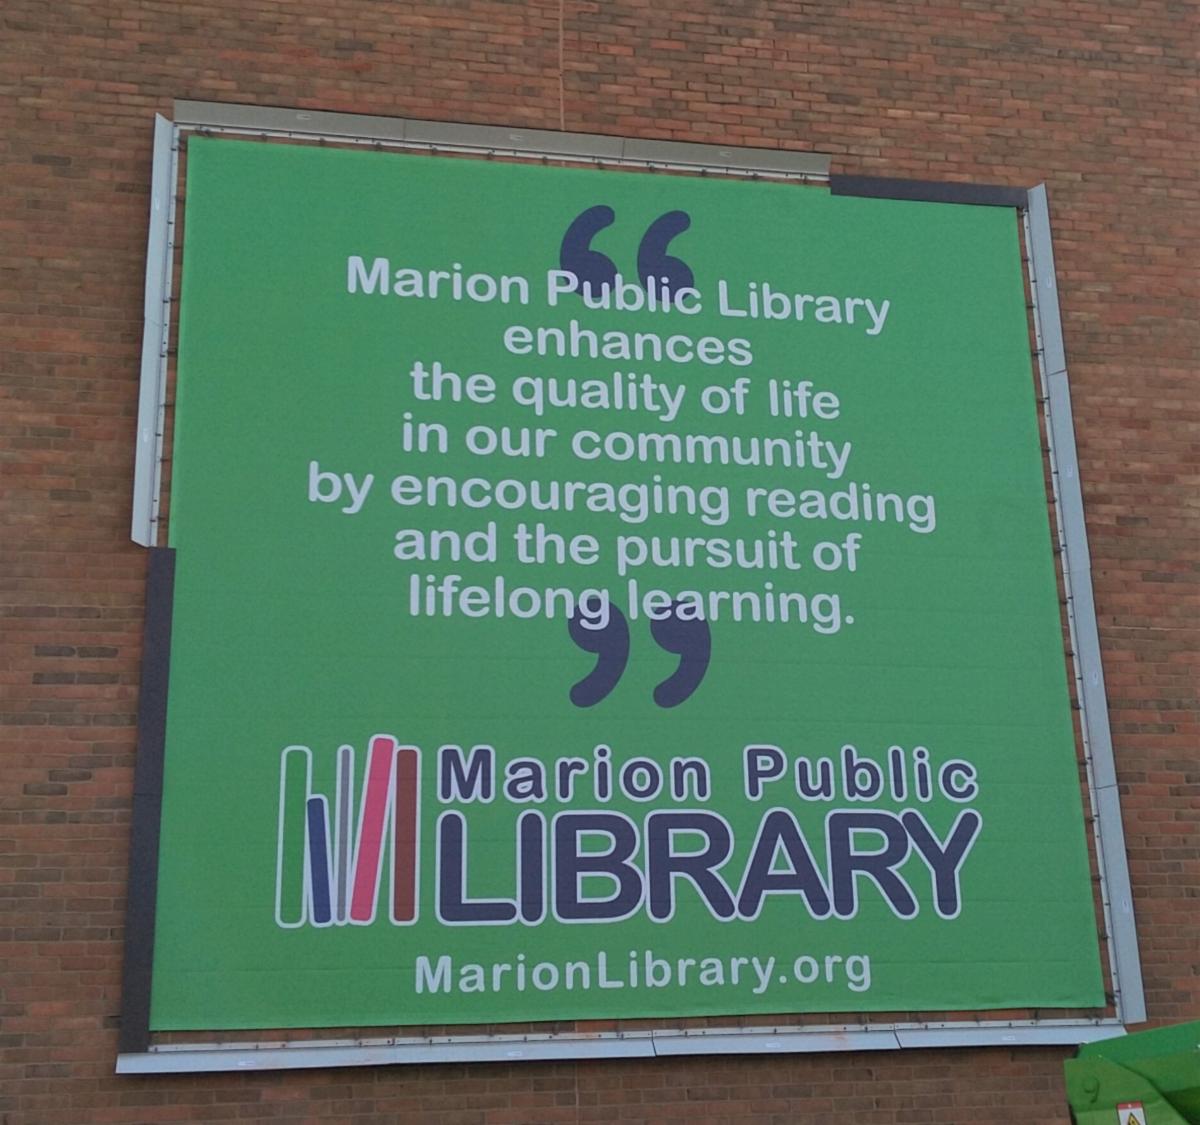 Marion_Public_Library_Lind_BannerFrame_Hinge_evergreen_marketing_message Does Your Banner System Let Your Client Keep Up With Their Marketing Calendar? Lind's Does.